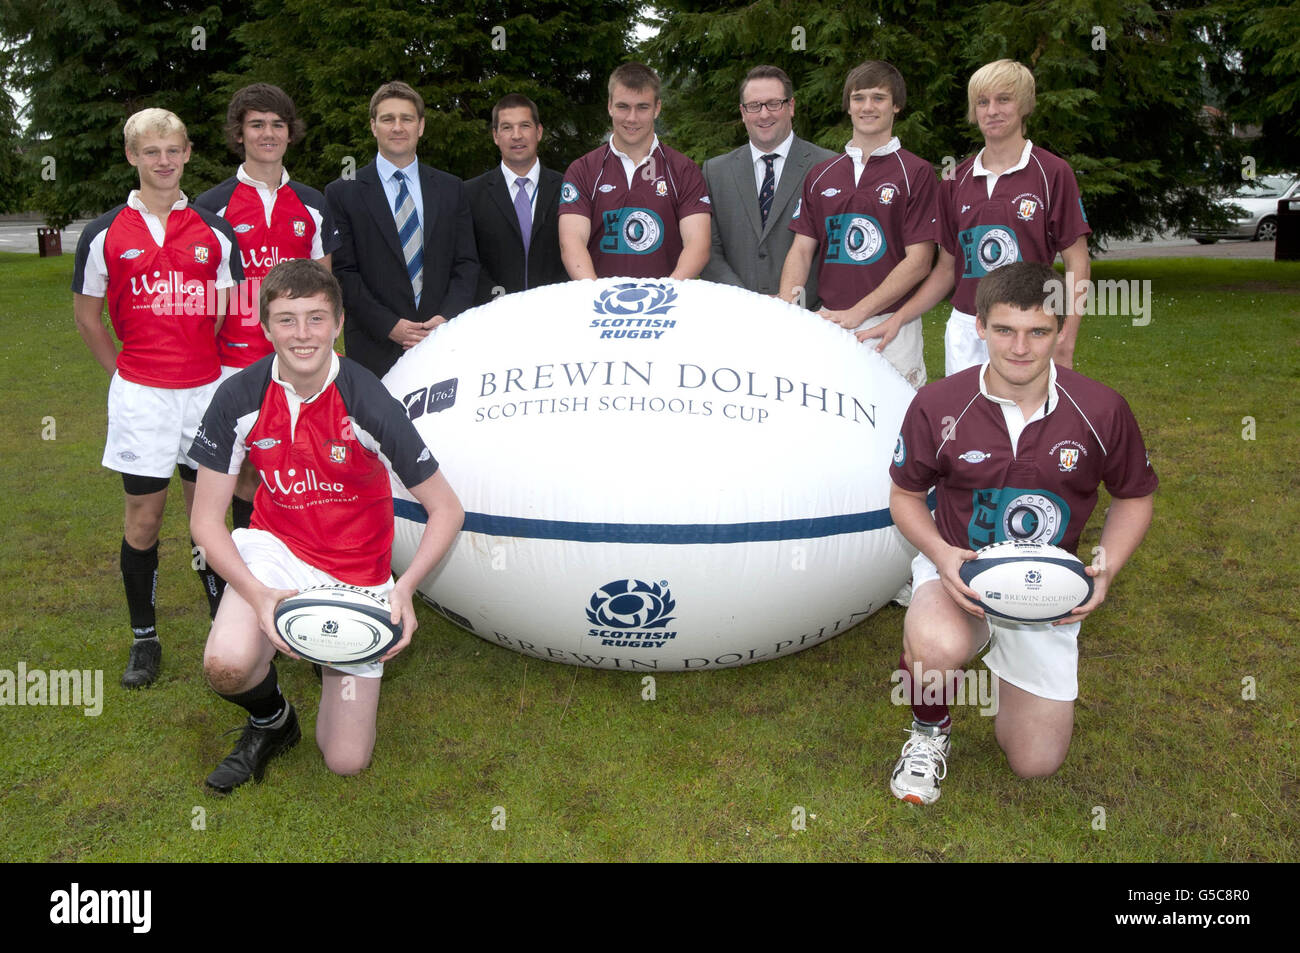 Standing (left to right) Ben Hessell, Jack Christie, Head of Clubs and Schools Nick Rennie, Scottish Rugby Union's Angus Wallace, Barry Shepherd, Brewin Dolphin's Ton Christie, Eddie Hessell with Scott Murray (front left) and John Crilly (front right) during a Photocall at Banchory Academy, Banchory. Stock Photo